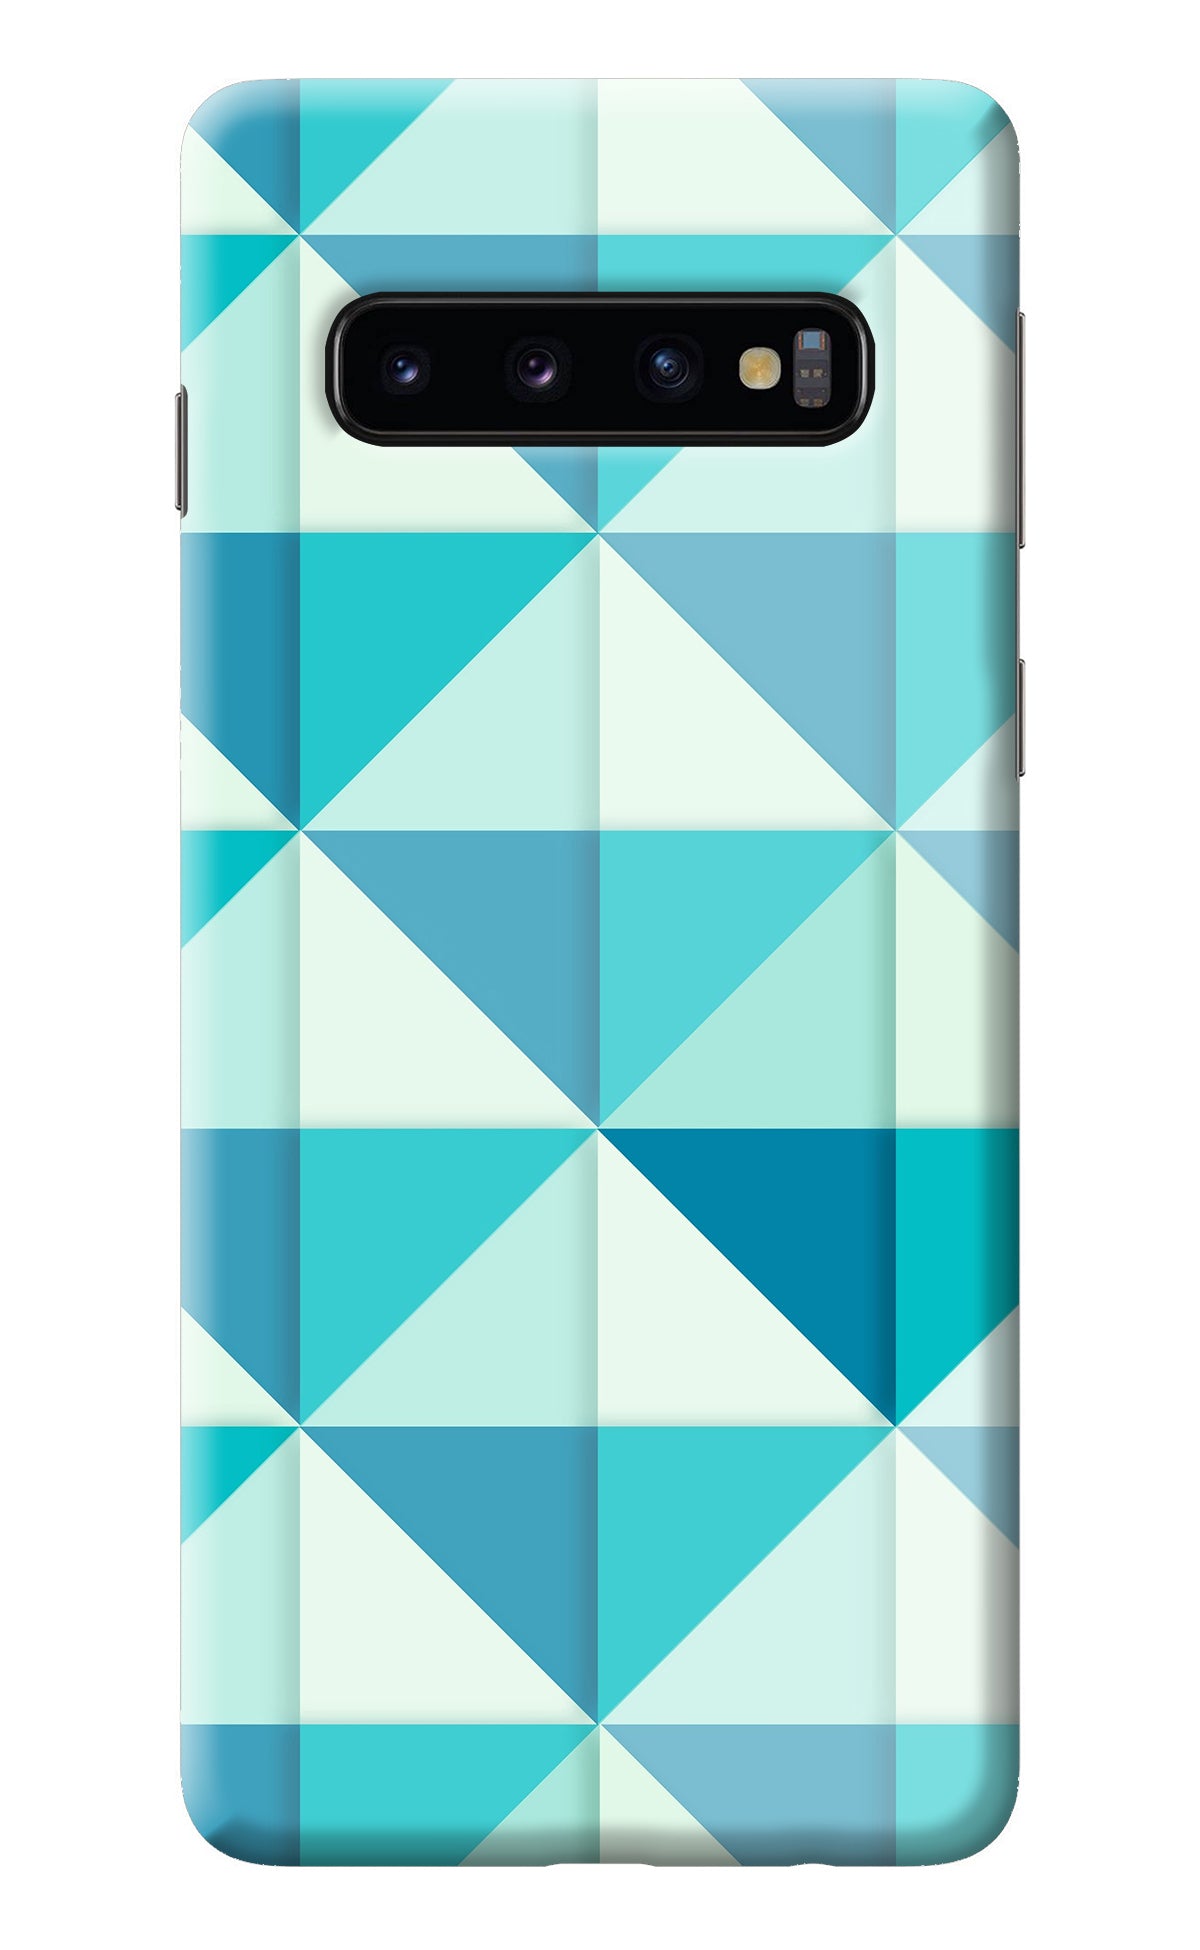 Abstract Samsung S10 Back Cover